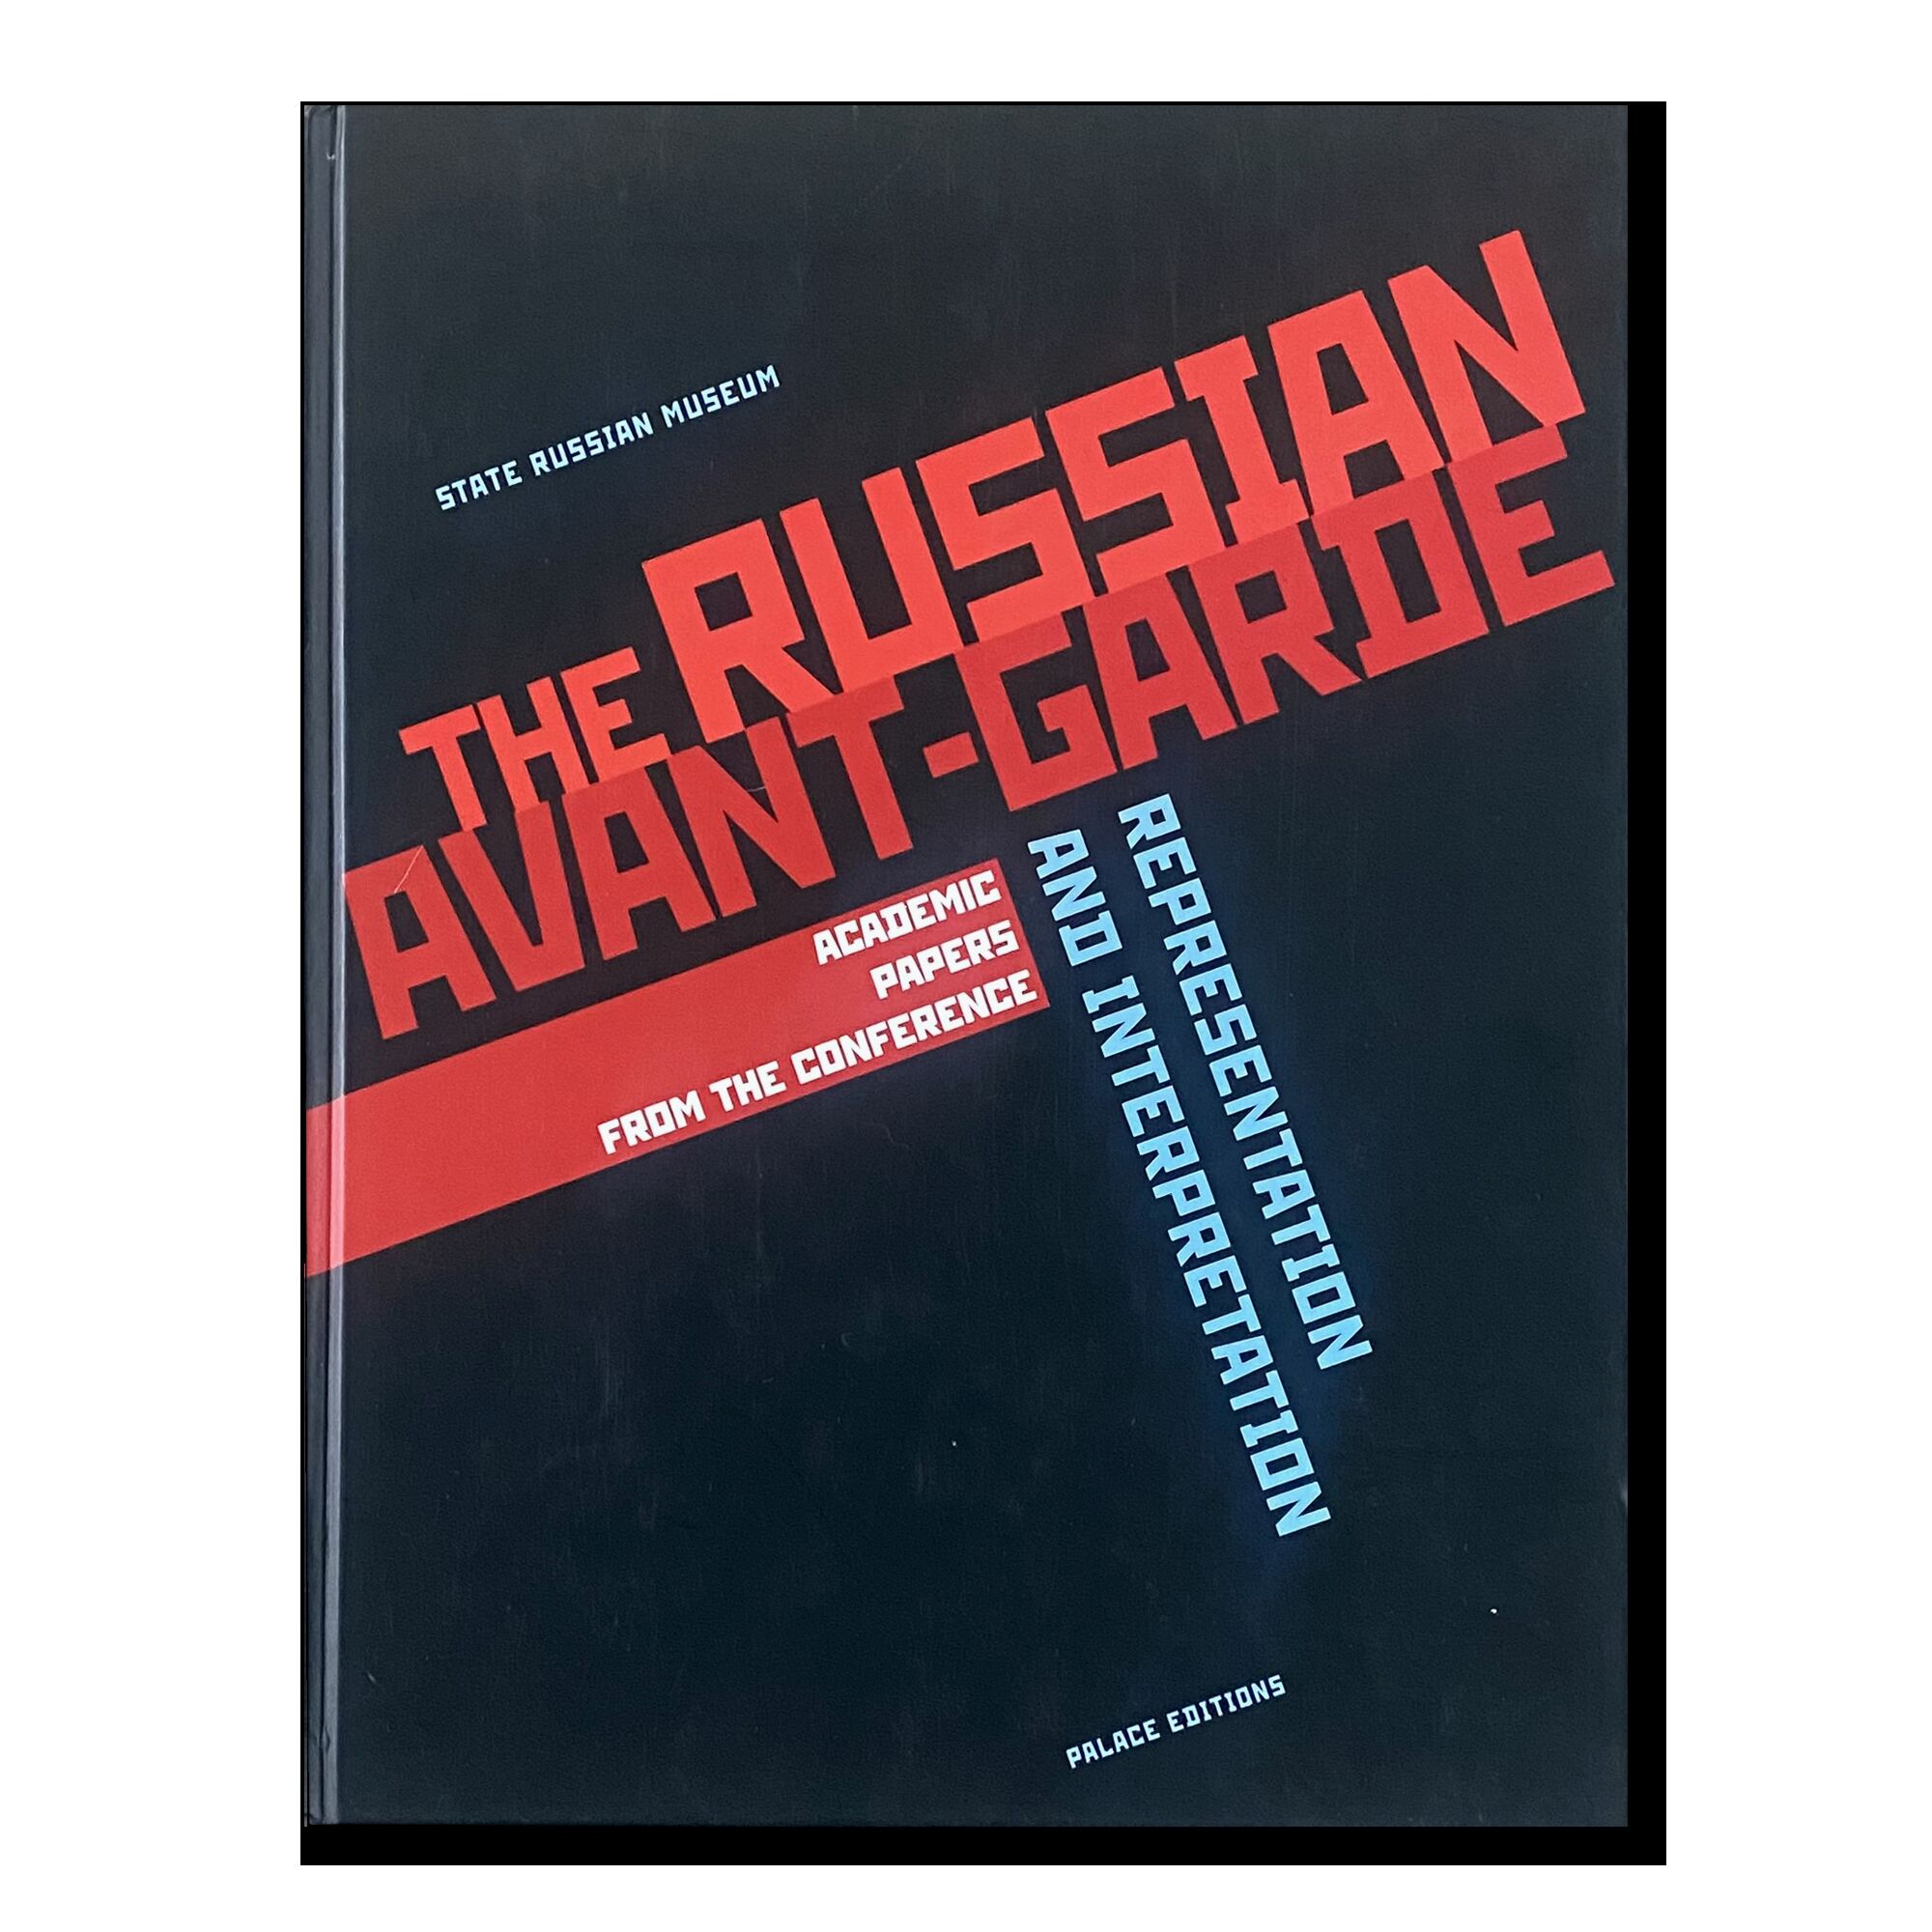 The Russian Avant-Garde. Academic papers from the conference